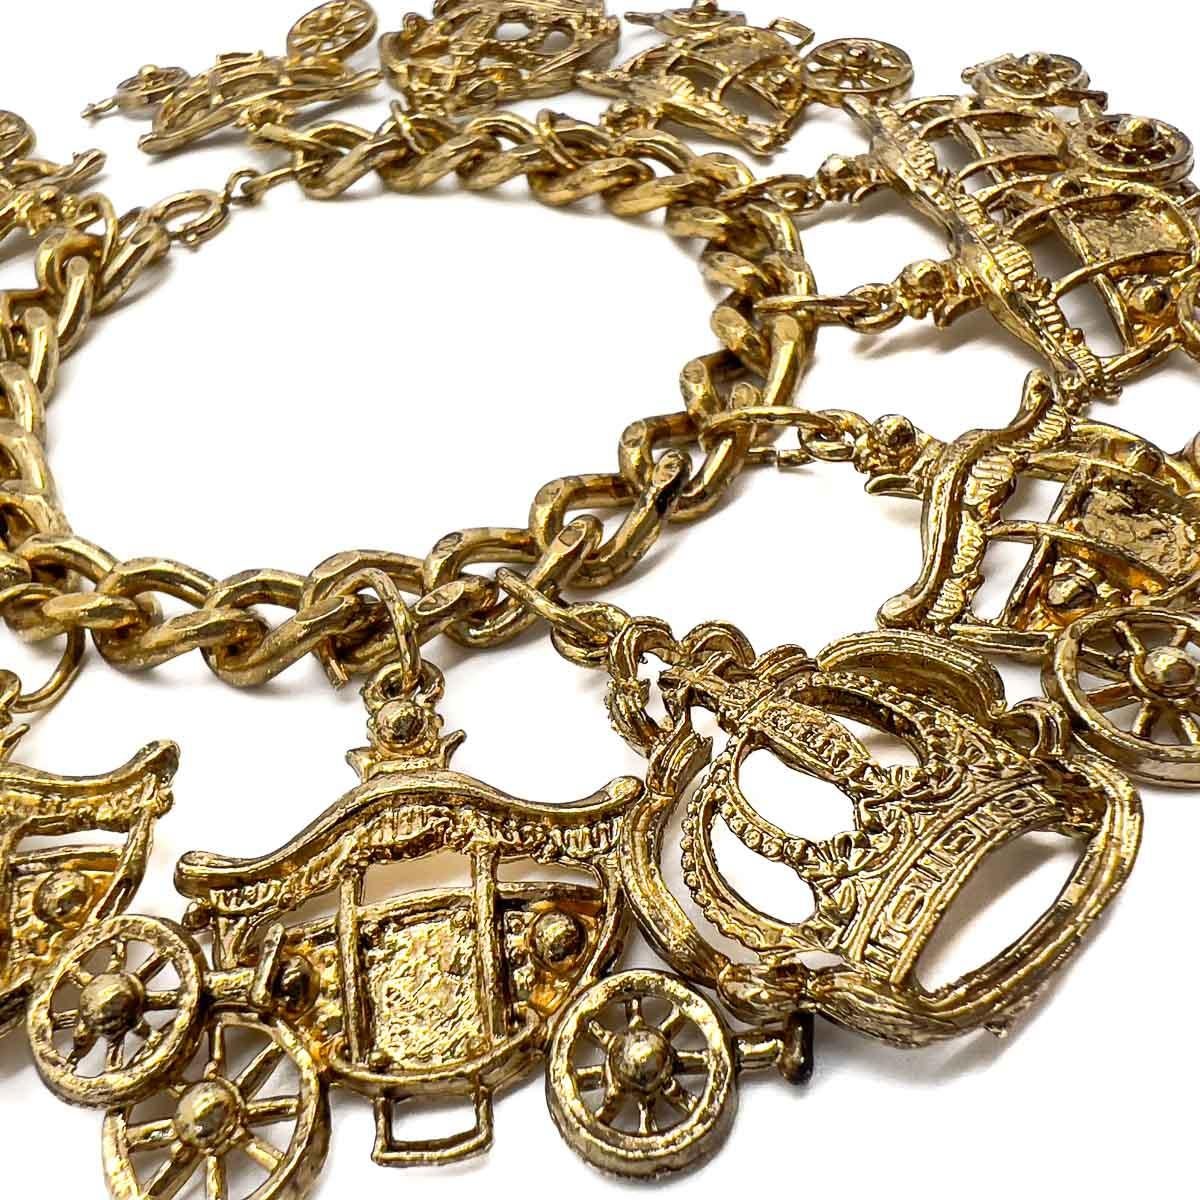 A vintage Coronation Charm Bracelet. Loud and proud this is a fabulous piece of celebratory jewellery.

An unsigned beauty. A rare treasure. Just because a jewel doesn’t carry a designer name, doesn’t mean it isn't coveted. The unsigned beauties in